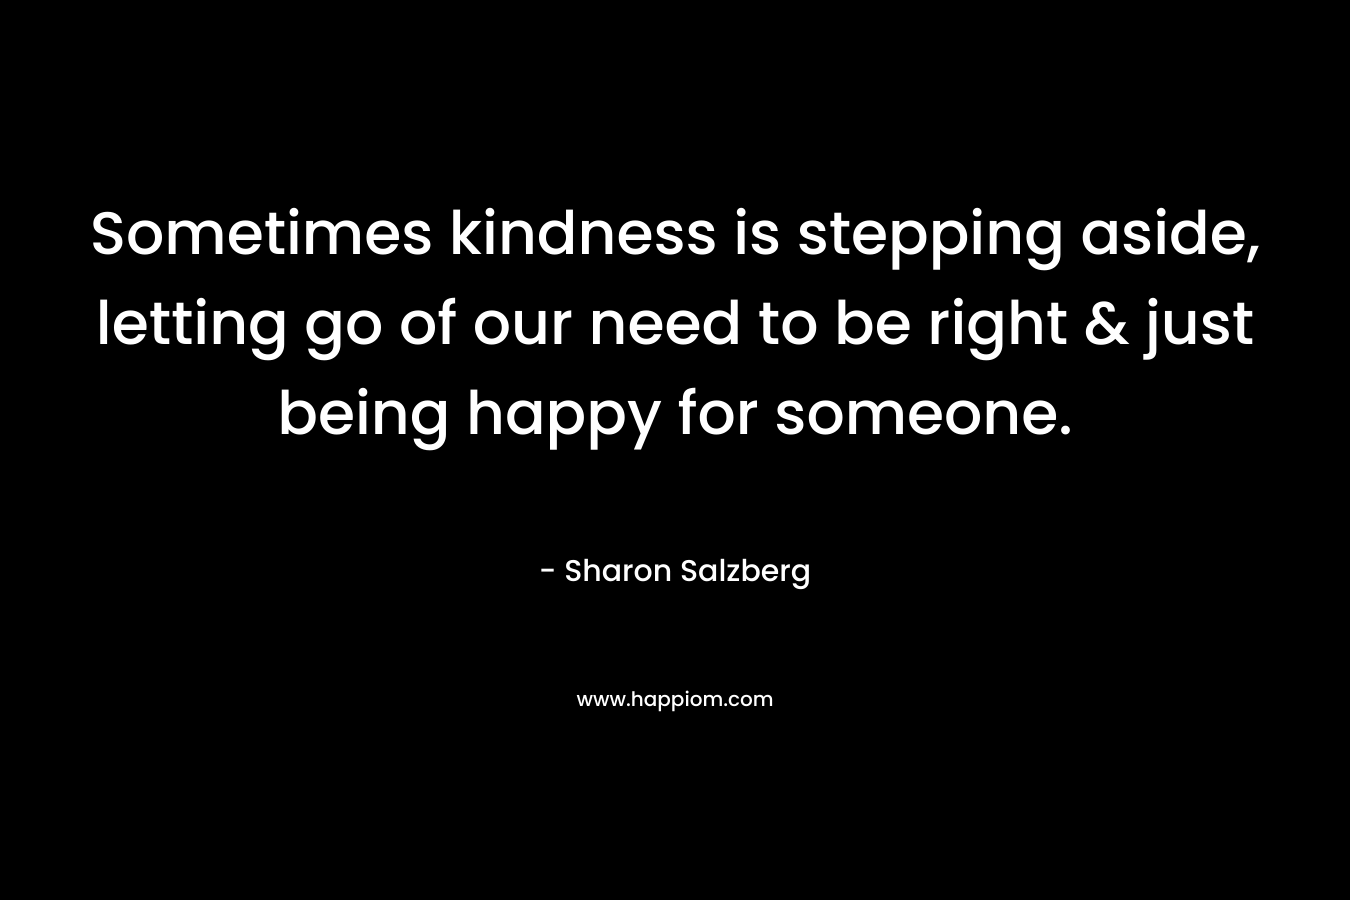 Sometimes kindness is stepping aside, letting go of our need to be right & just being happy for someone.